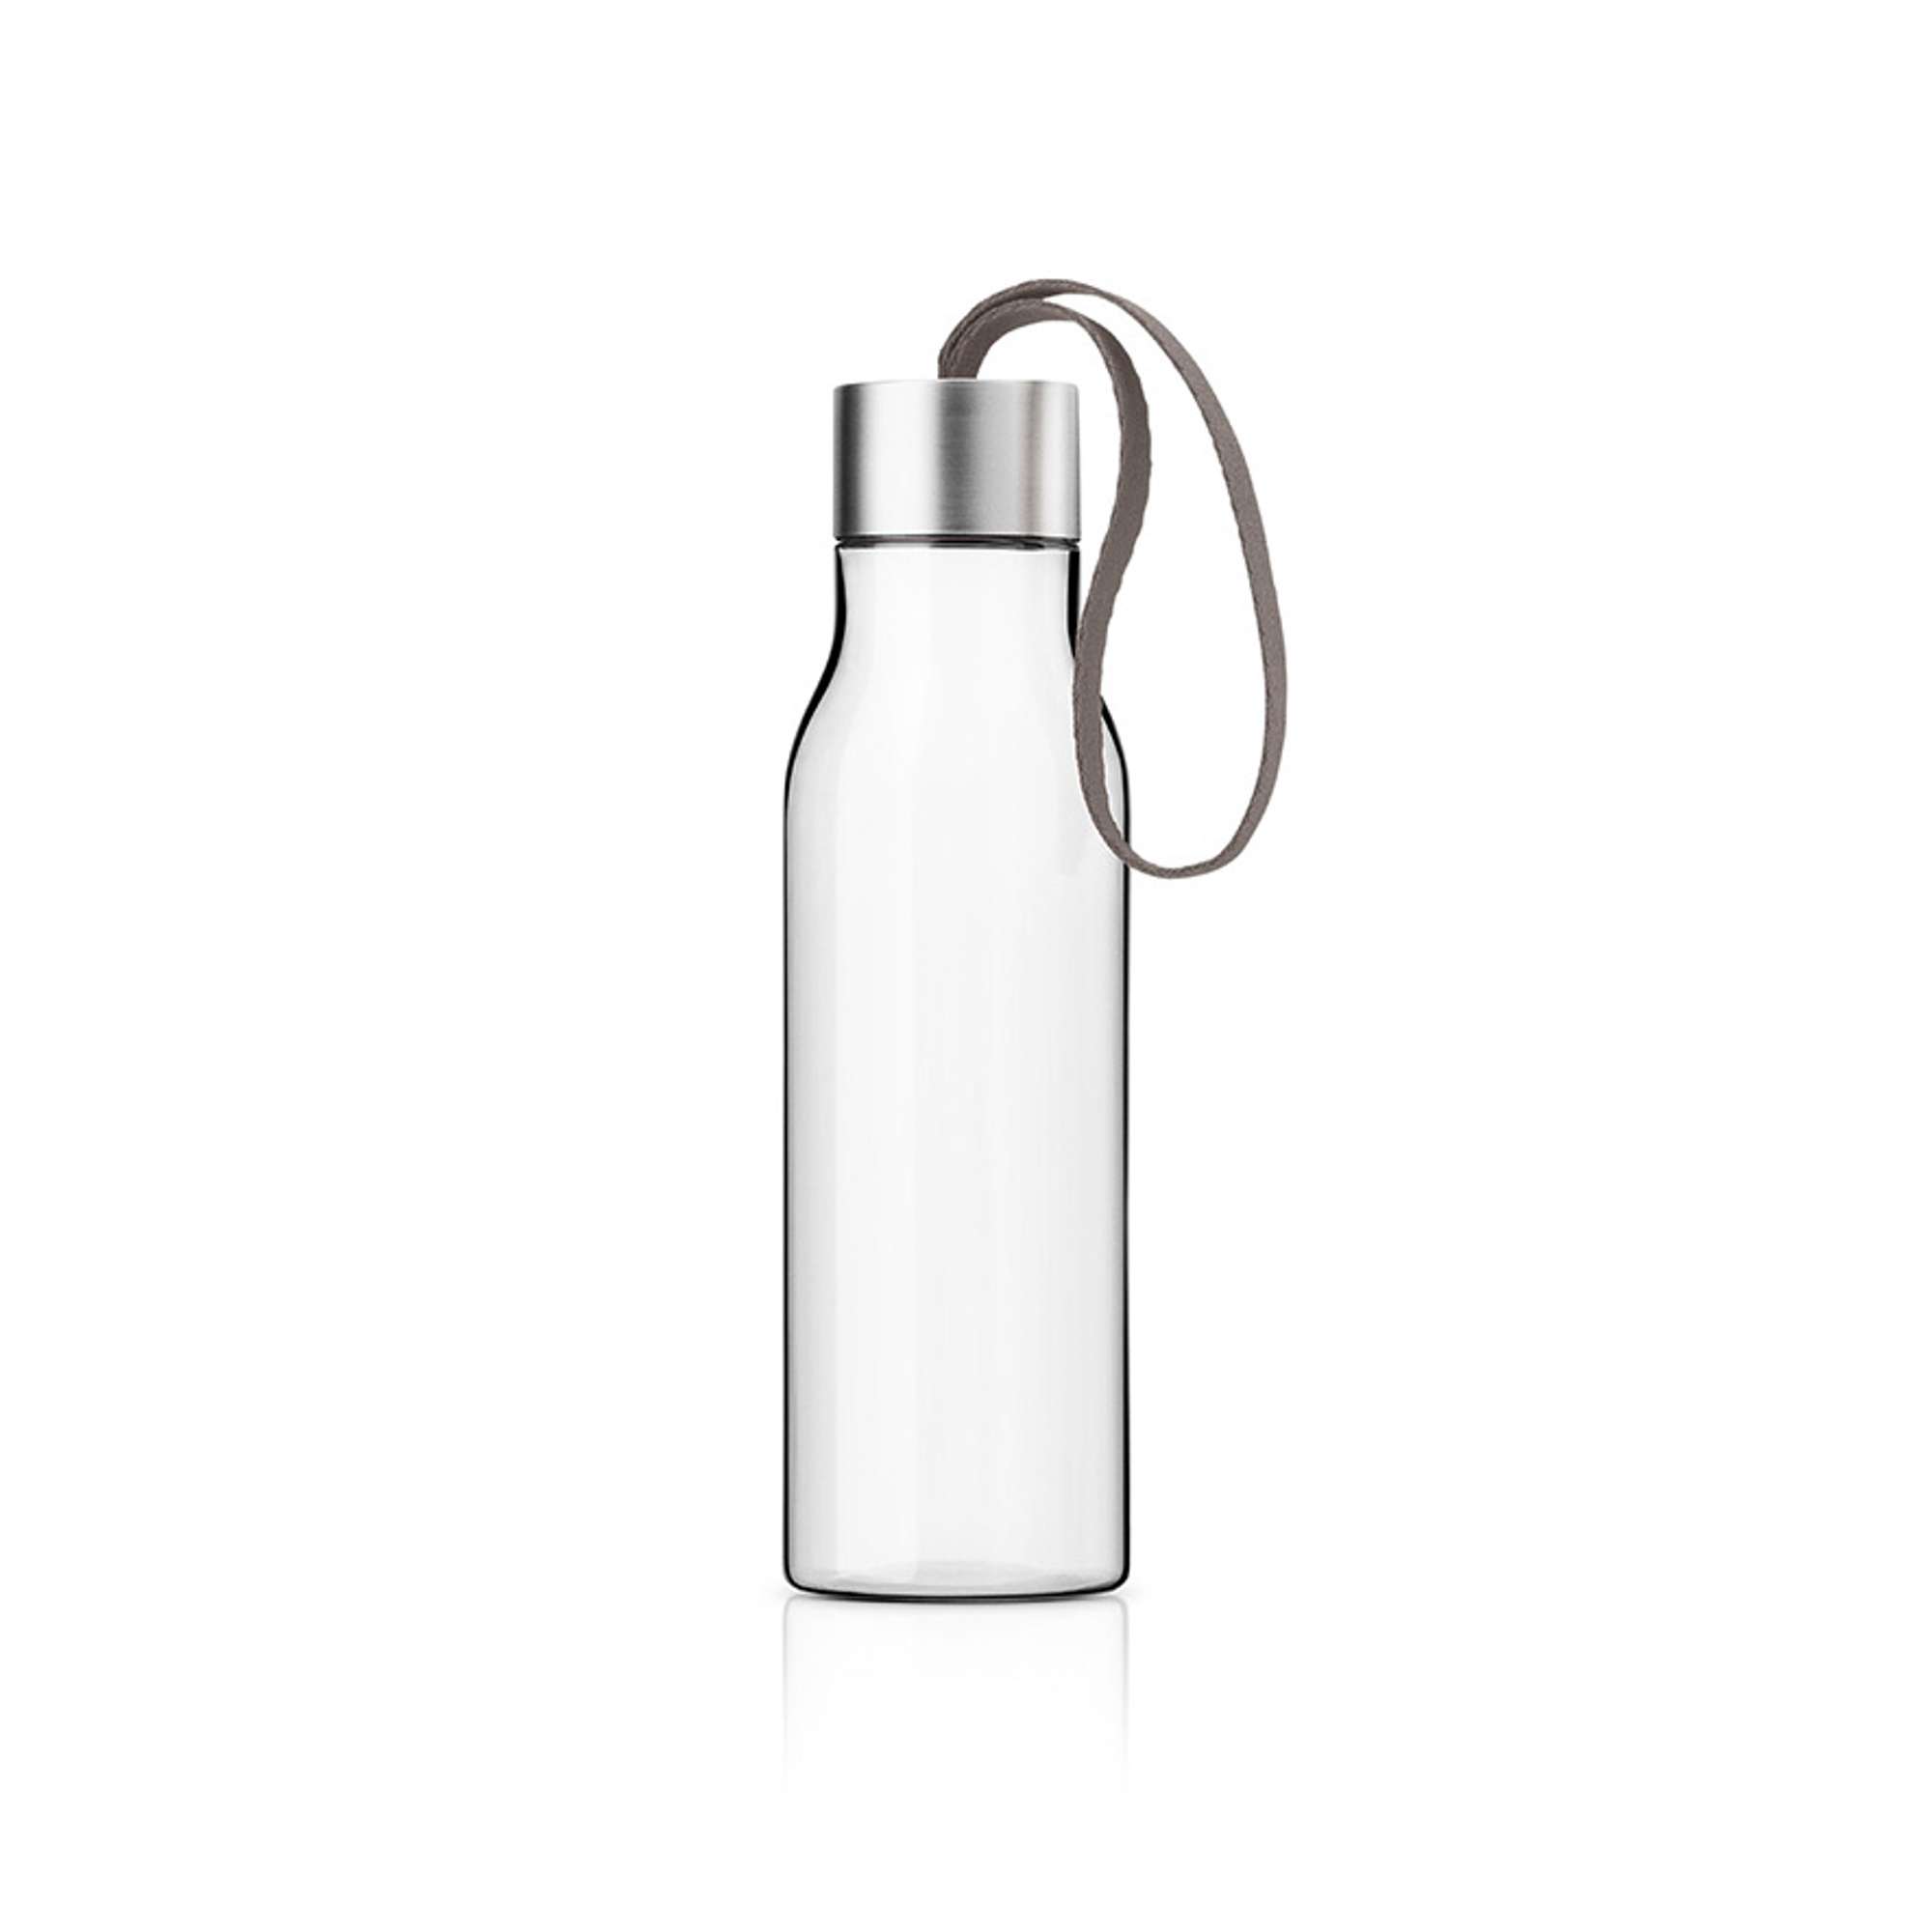 Drinking bottle - 0.5 liters - Taupe